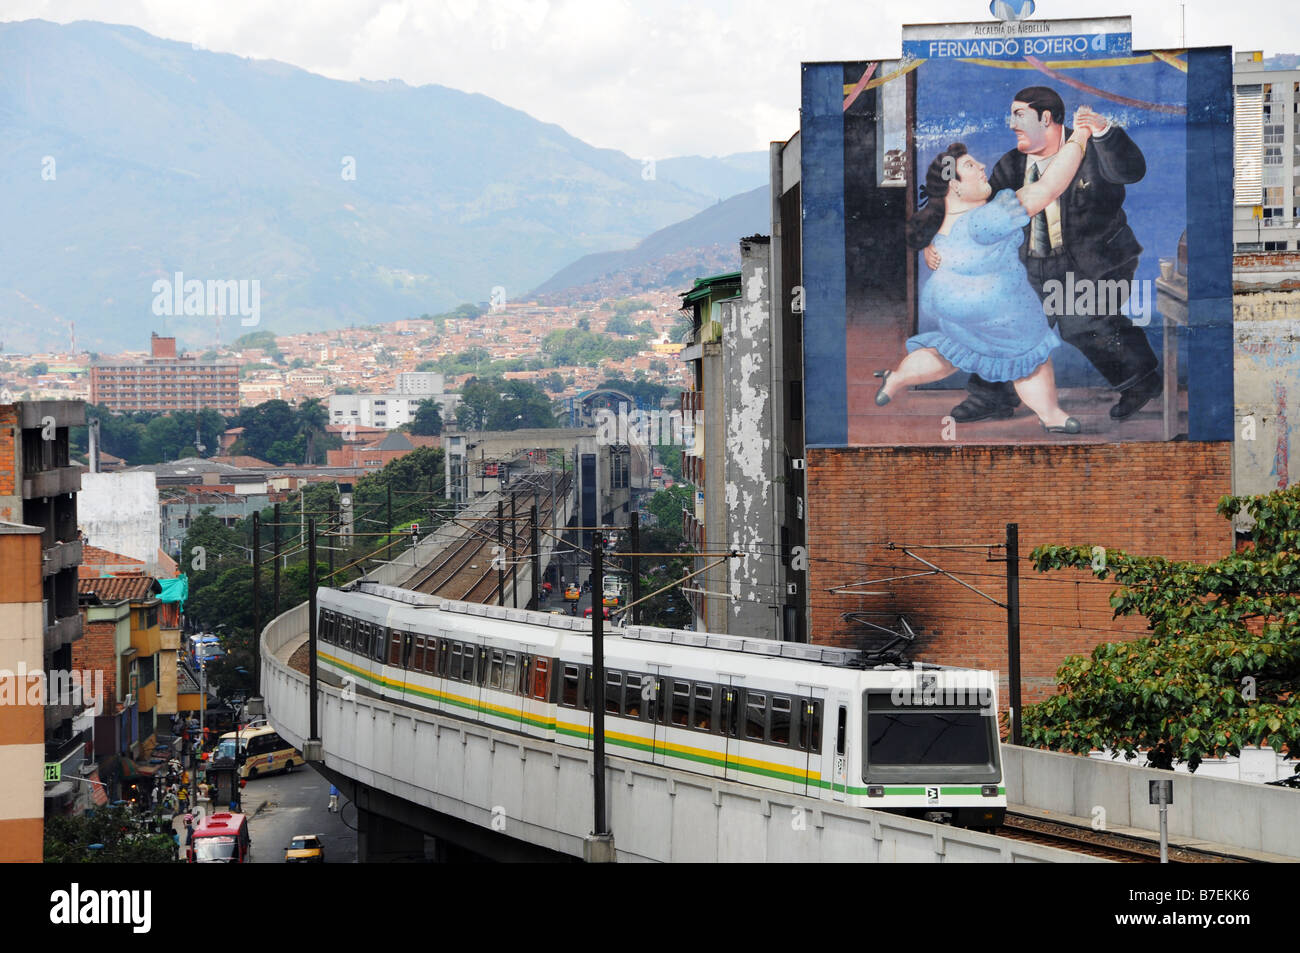 A panoramic view of Medellin, Columbia and the metro train which operates in the city. Stock Photo